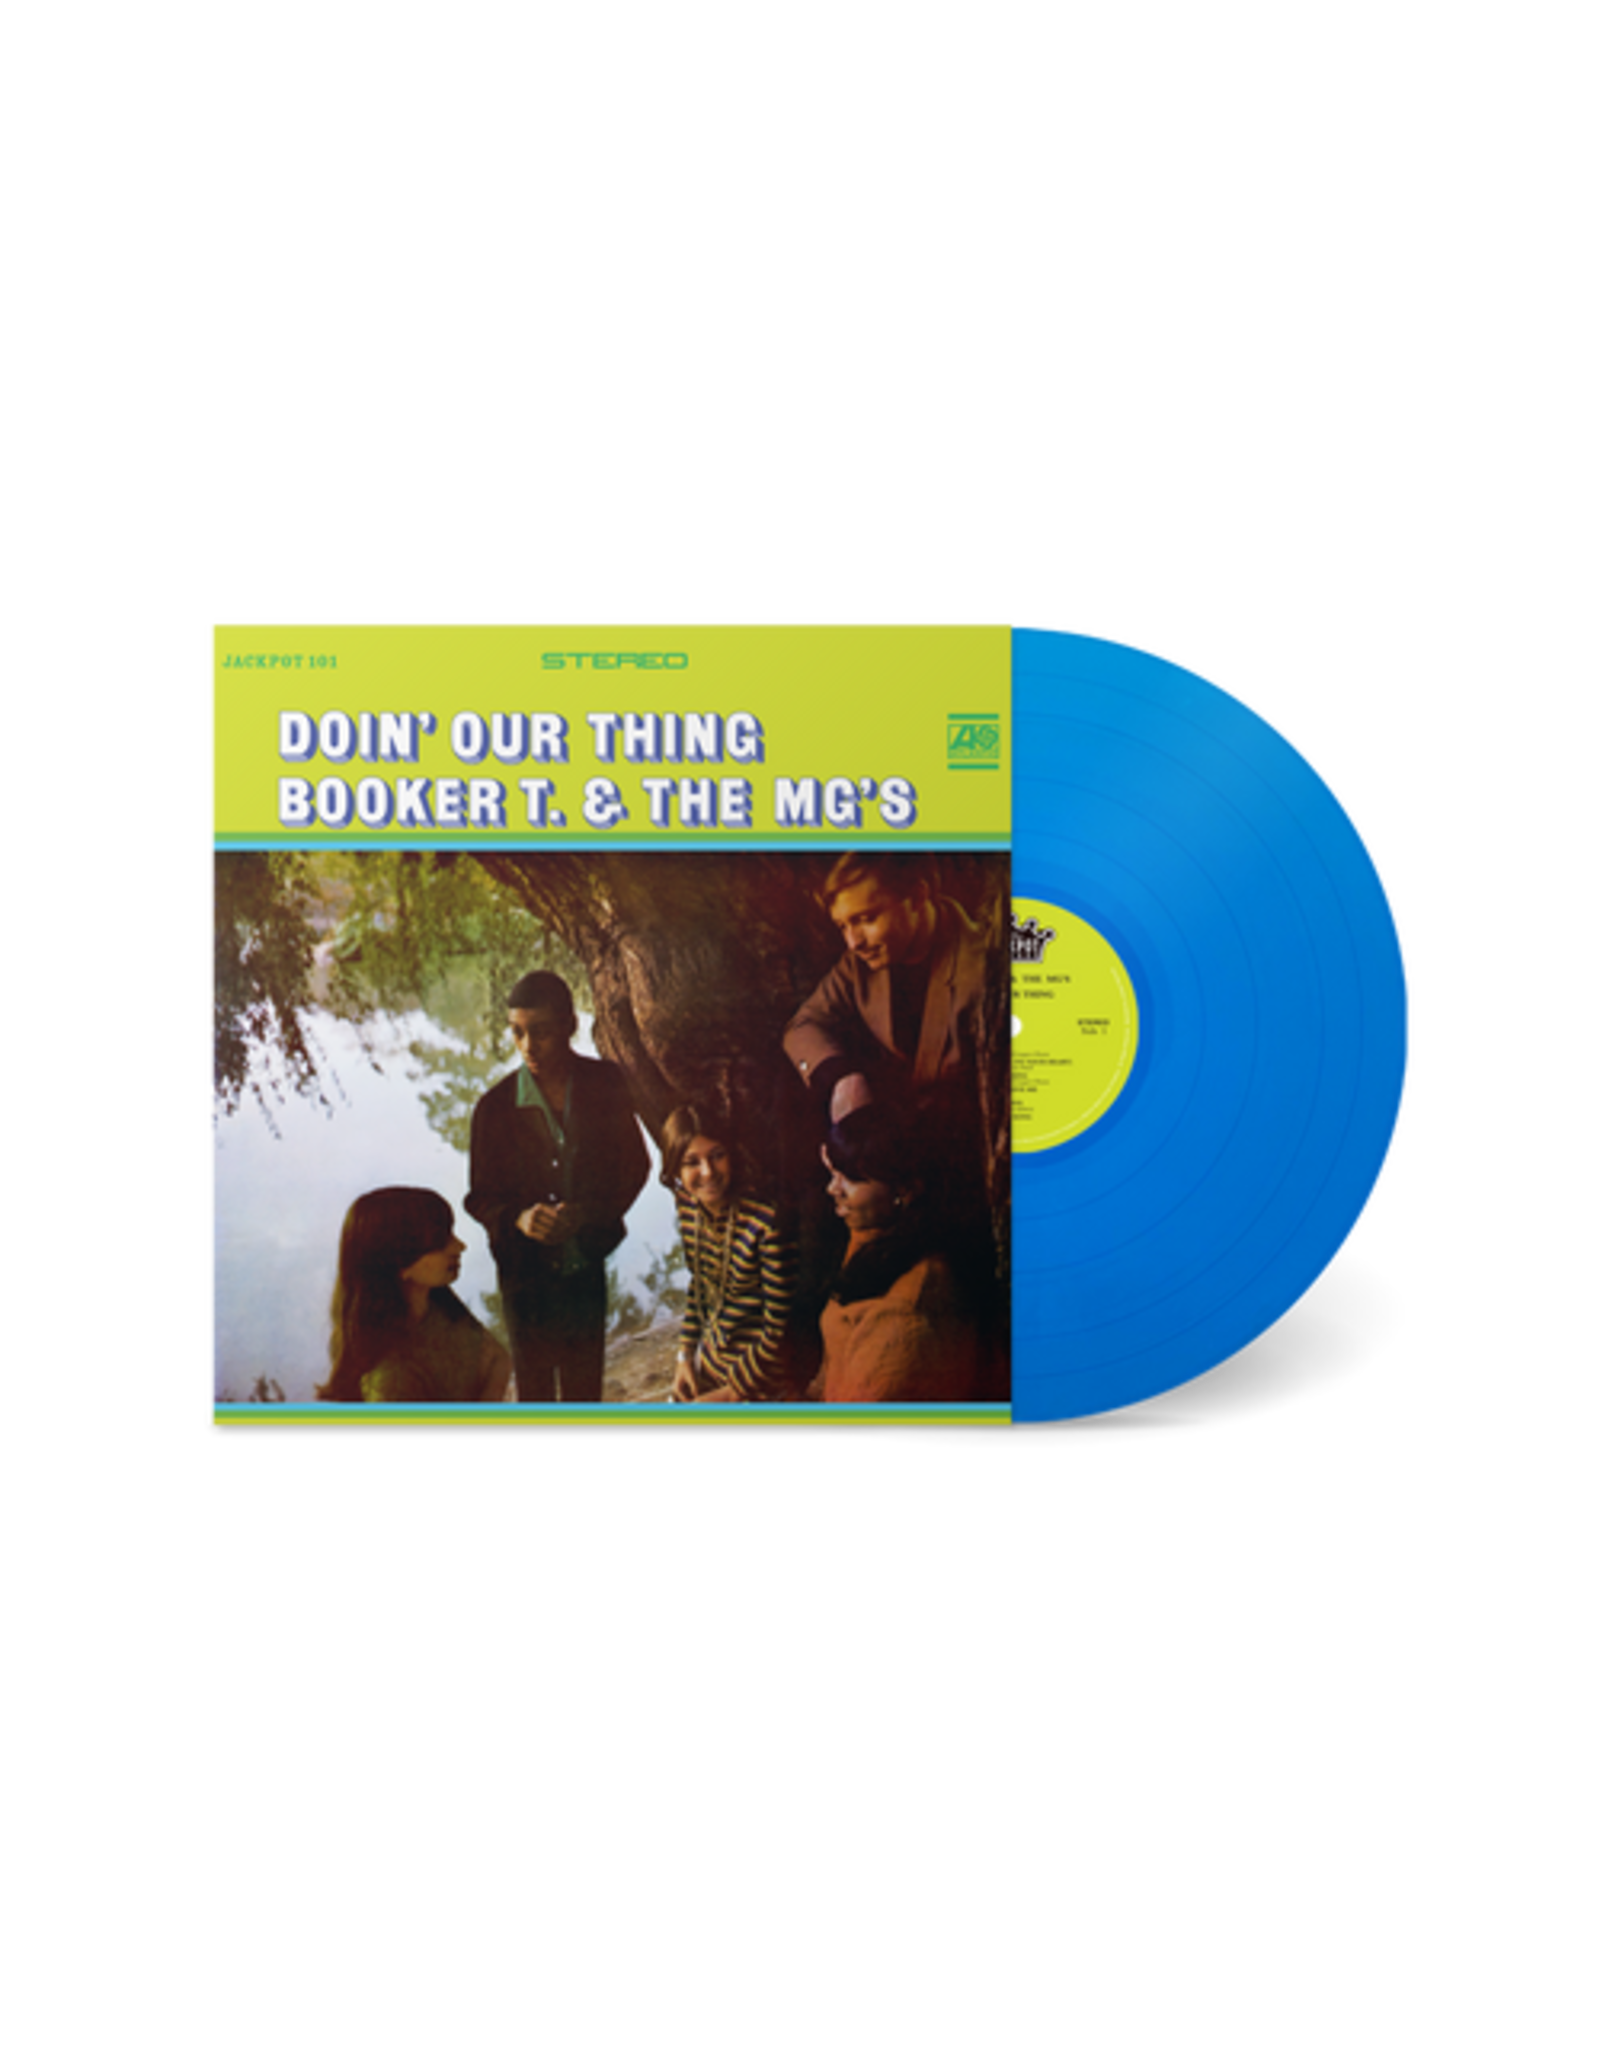 Jackpot Records Booker T & the MG's - Doin' Our Thing - Blue Vinyl LP